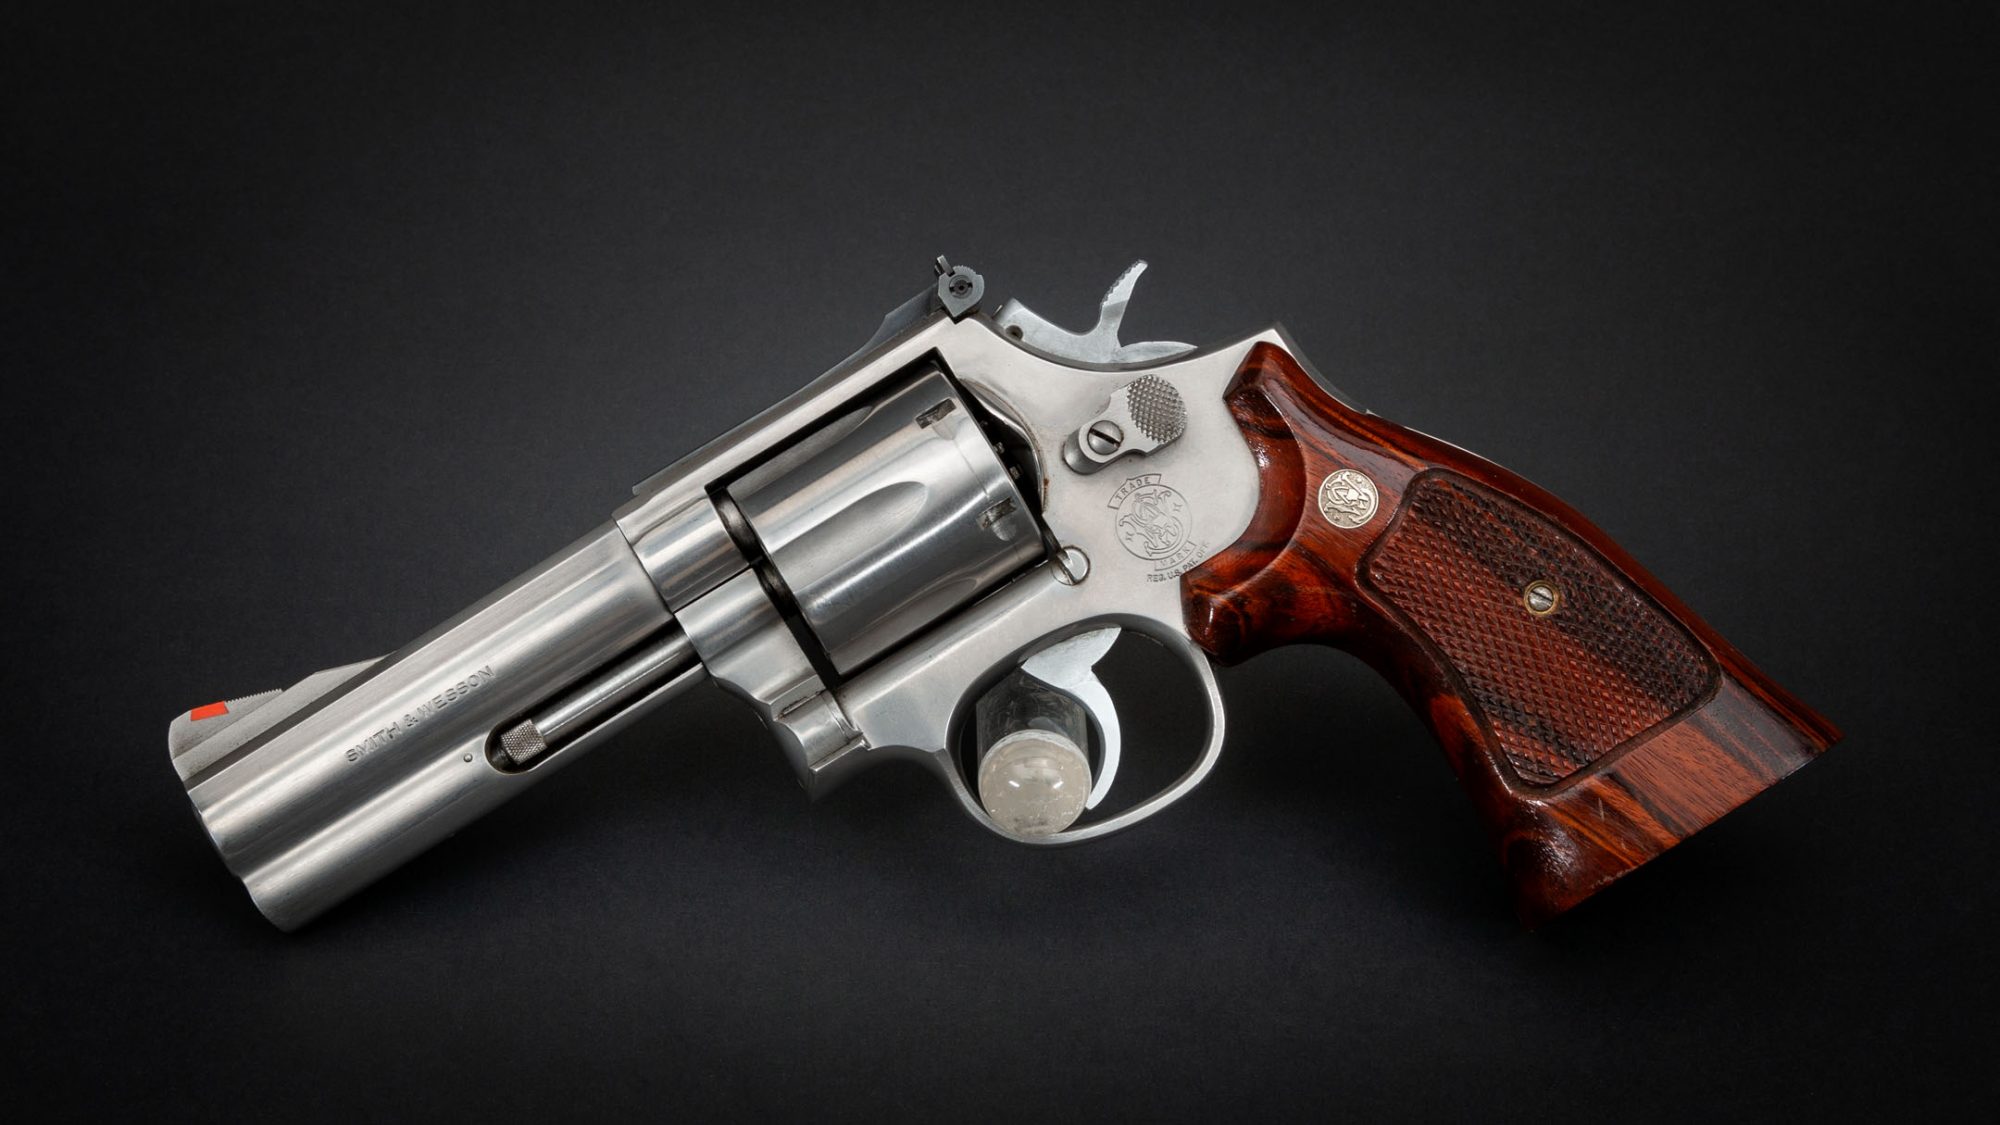 Smith & Wesson Model 686 in 357 Magnum, for sale by Turnbull Restoration Co. of Bloomfield, NY